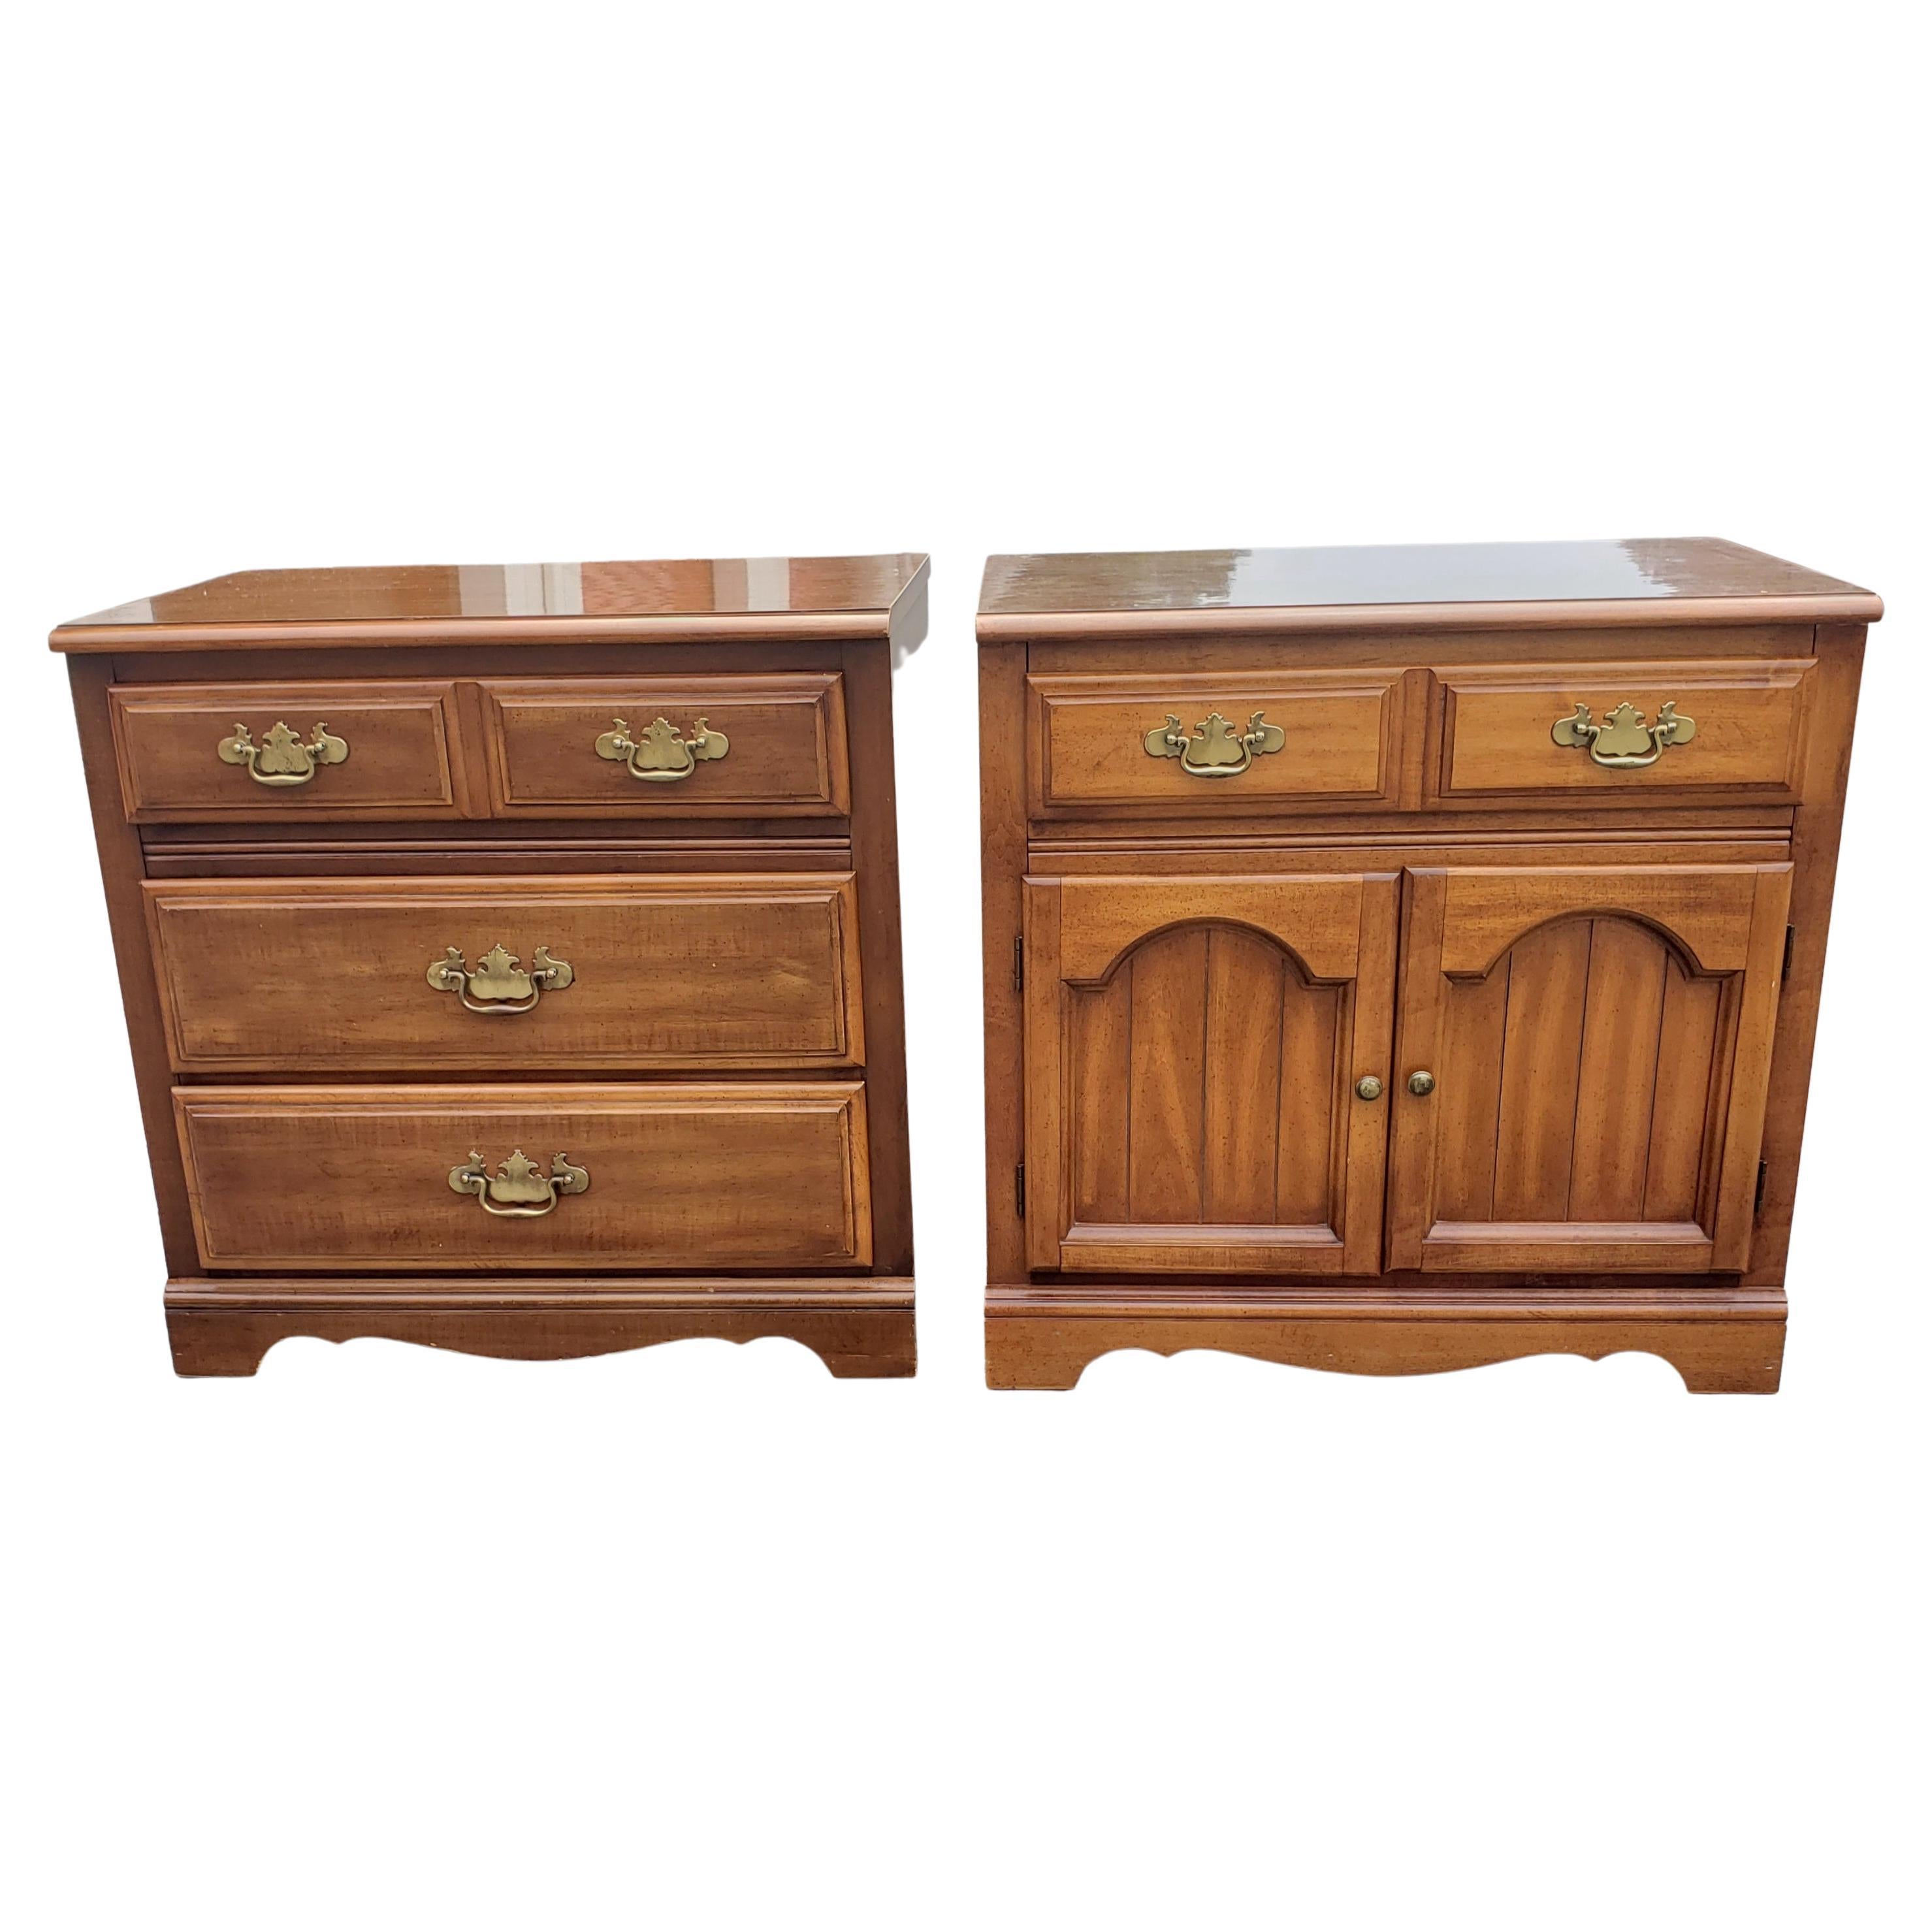 A Pair of American classical chest of drawer and cabinet chest from Dixie Furniture's Saybrook Maple collection. Good vintage condition. Measure 30.25